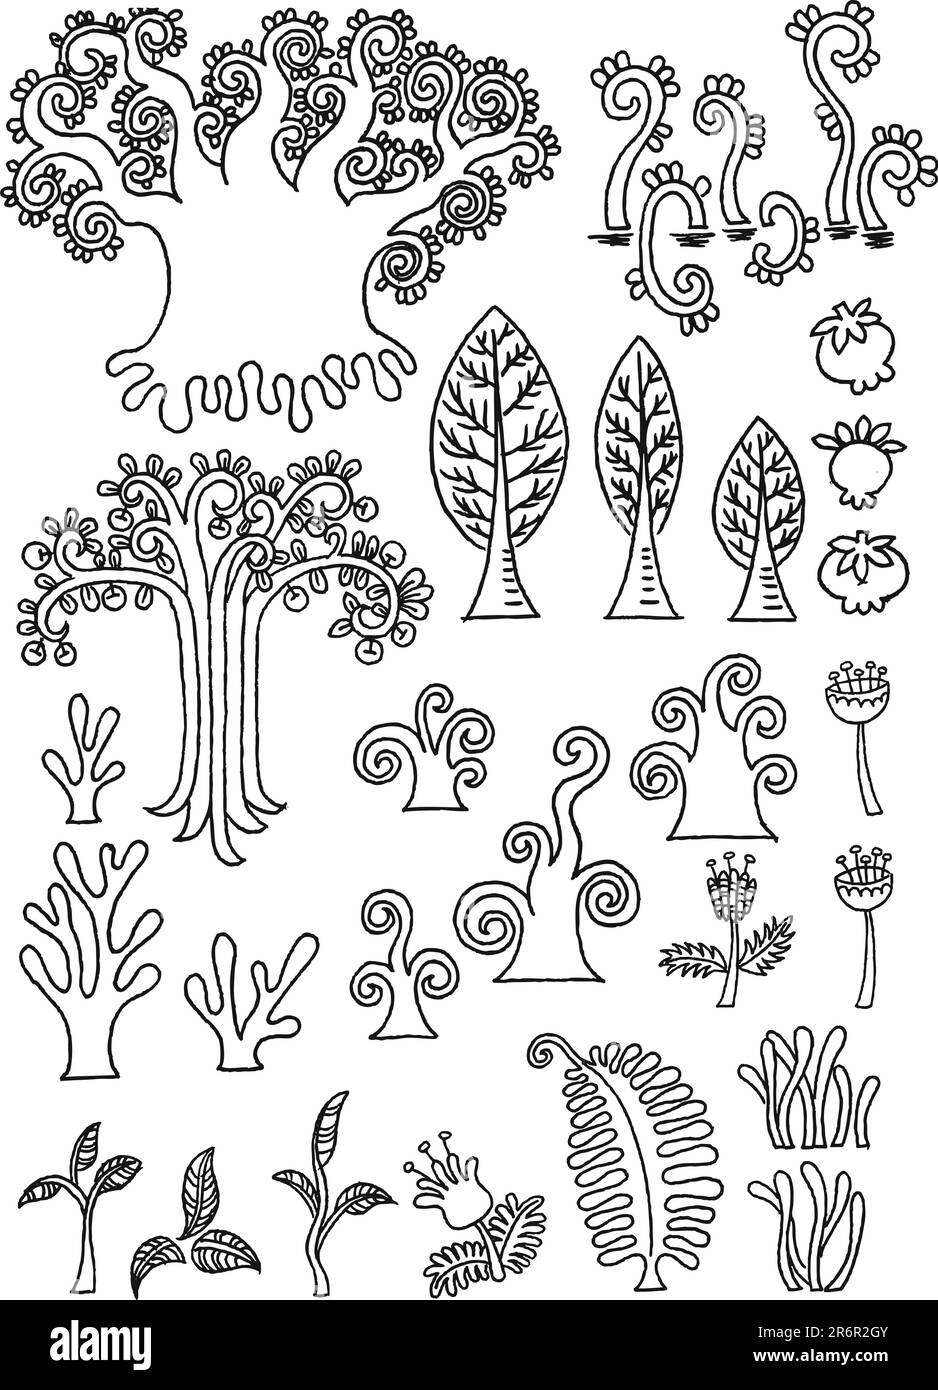 tree and plant hand drawing doodle Stock Vector